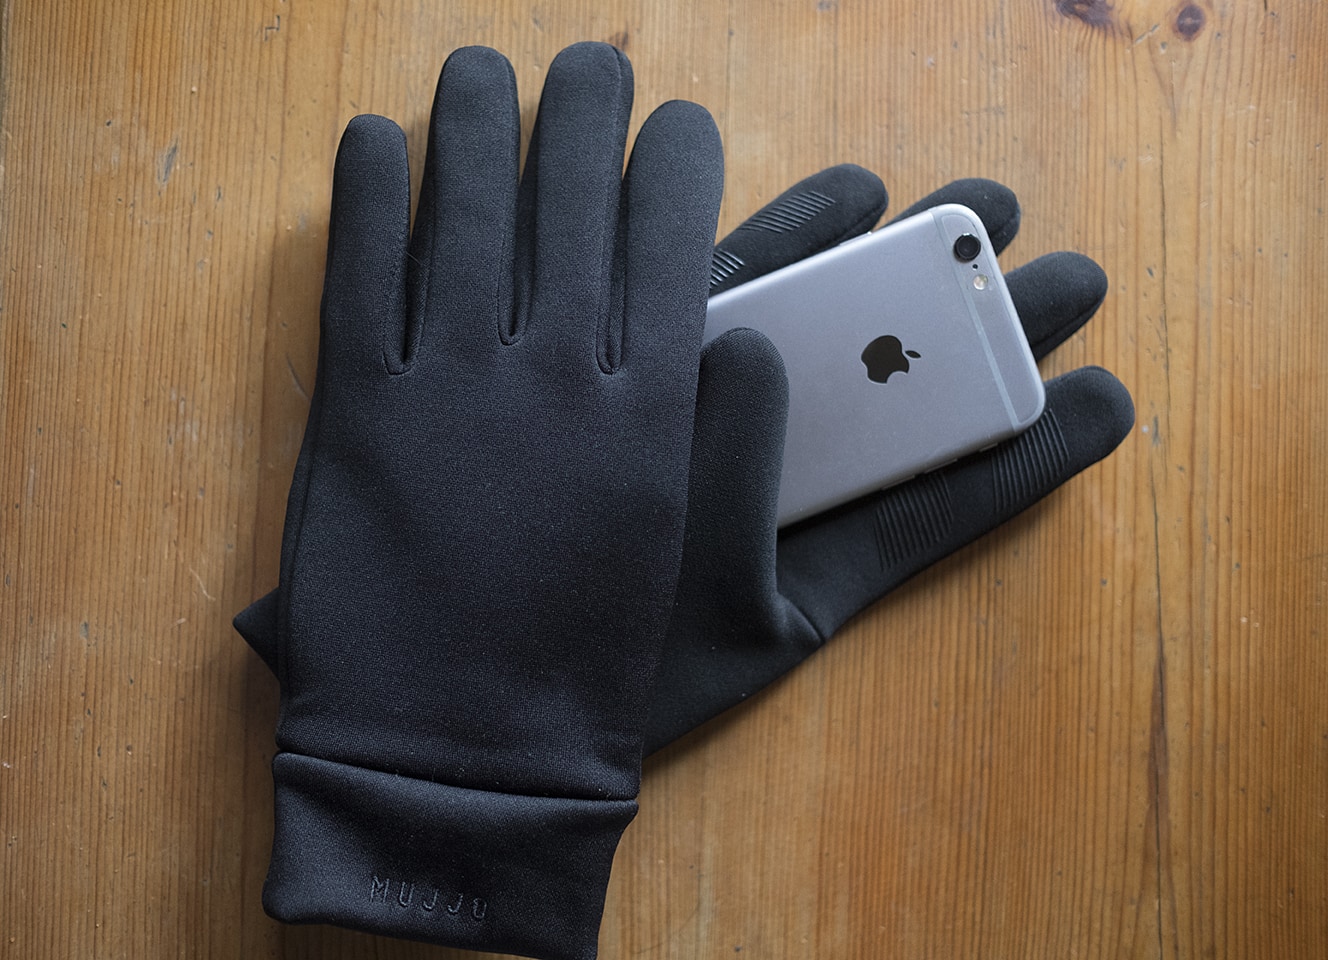 Mujjo touchscreen gloves with iPhone